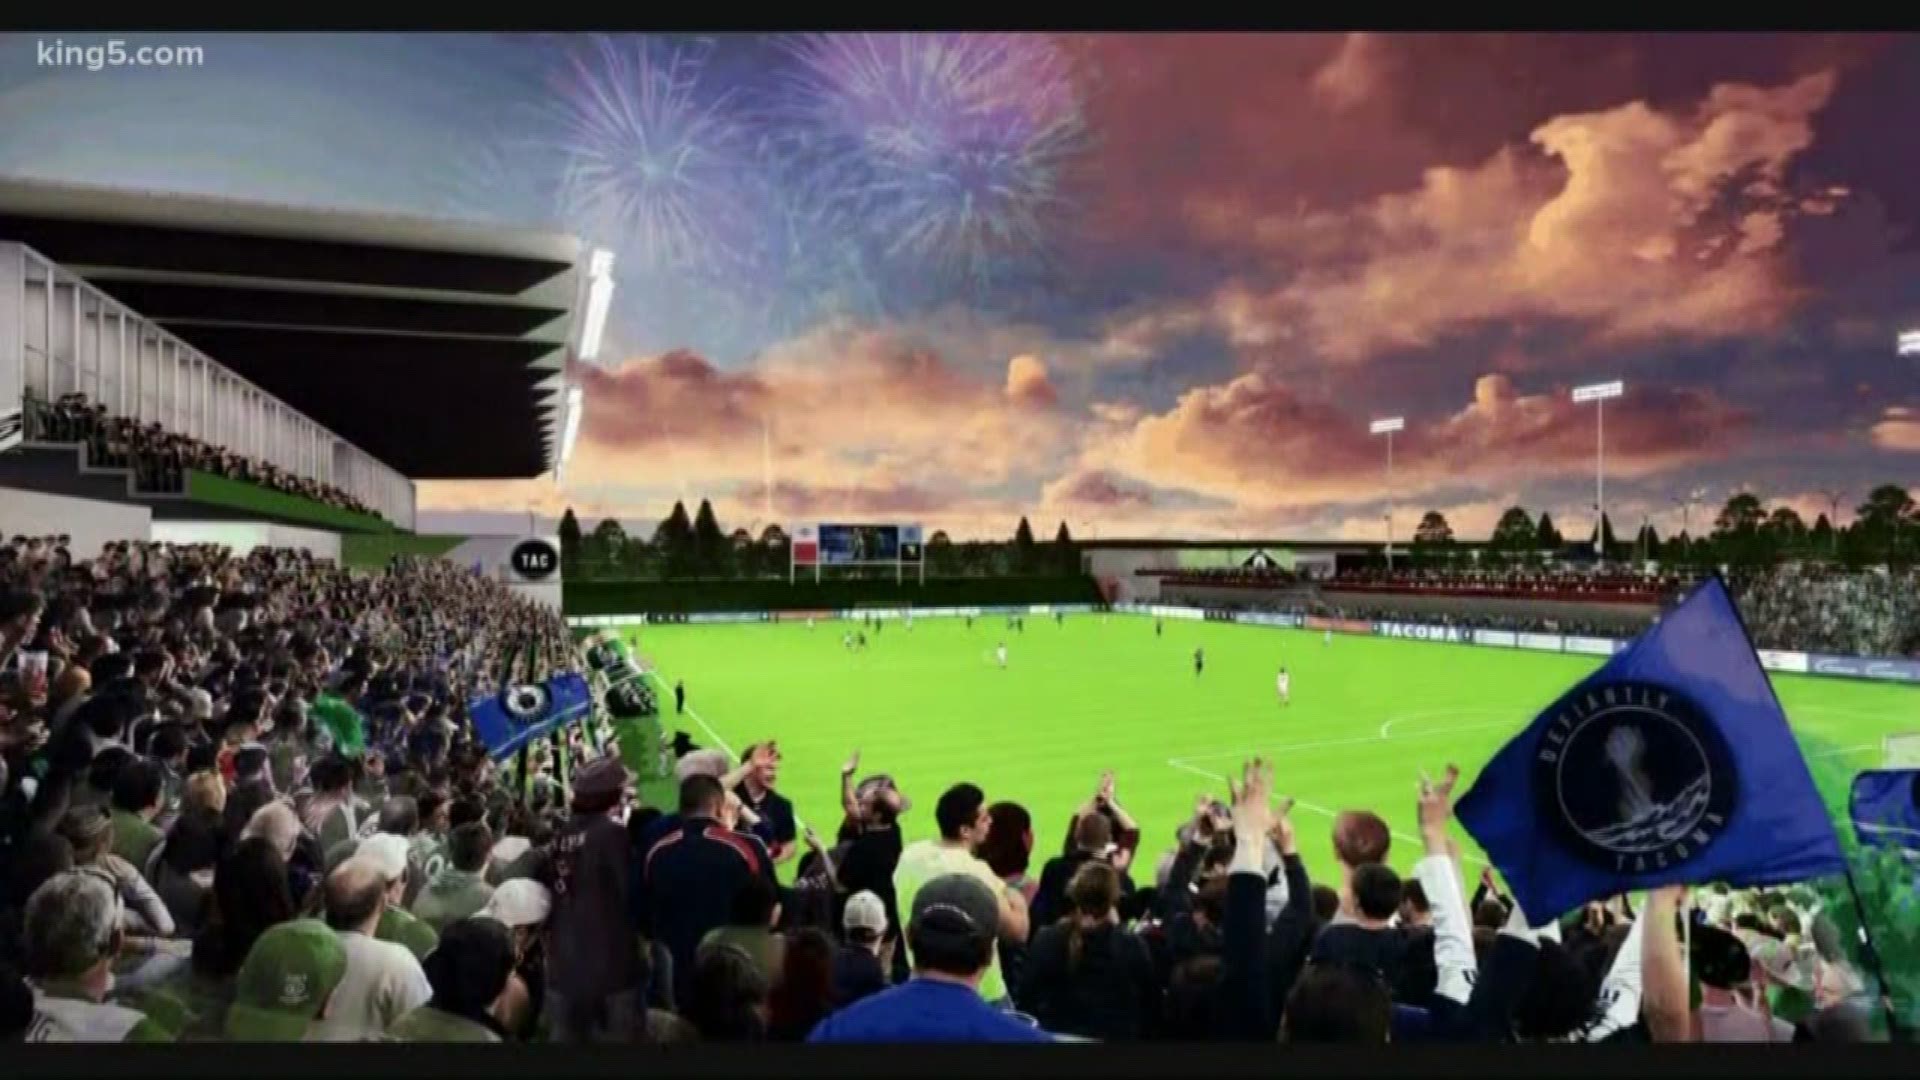 Tacoma City Council can vote to push the project forward, but not everyone is in support of building a new professional soccer stadium.